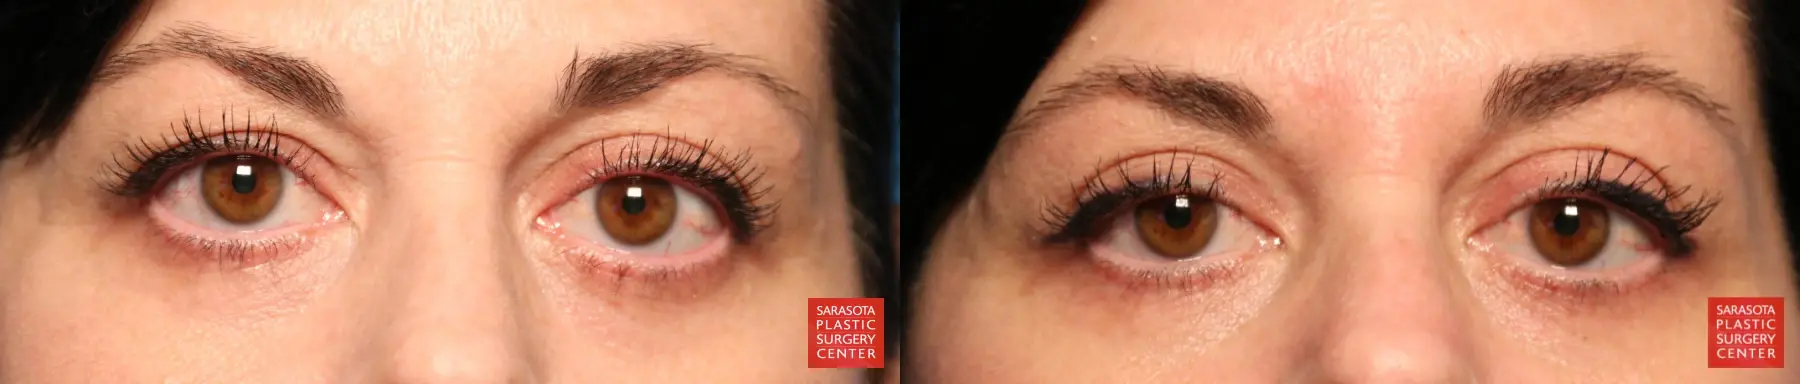 Eyelid Lift: Patient 15 - Before and After 1